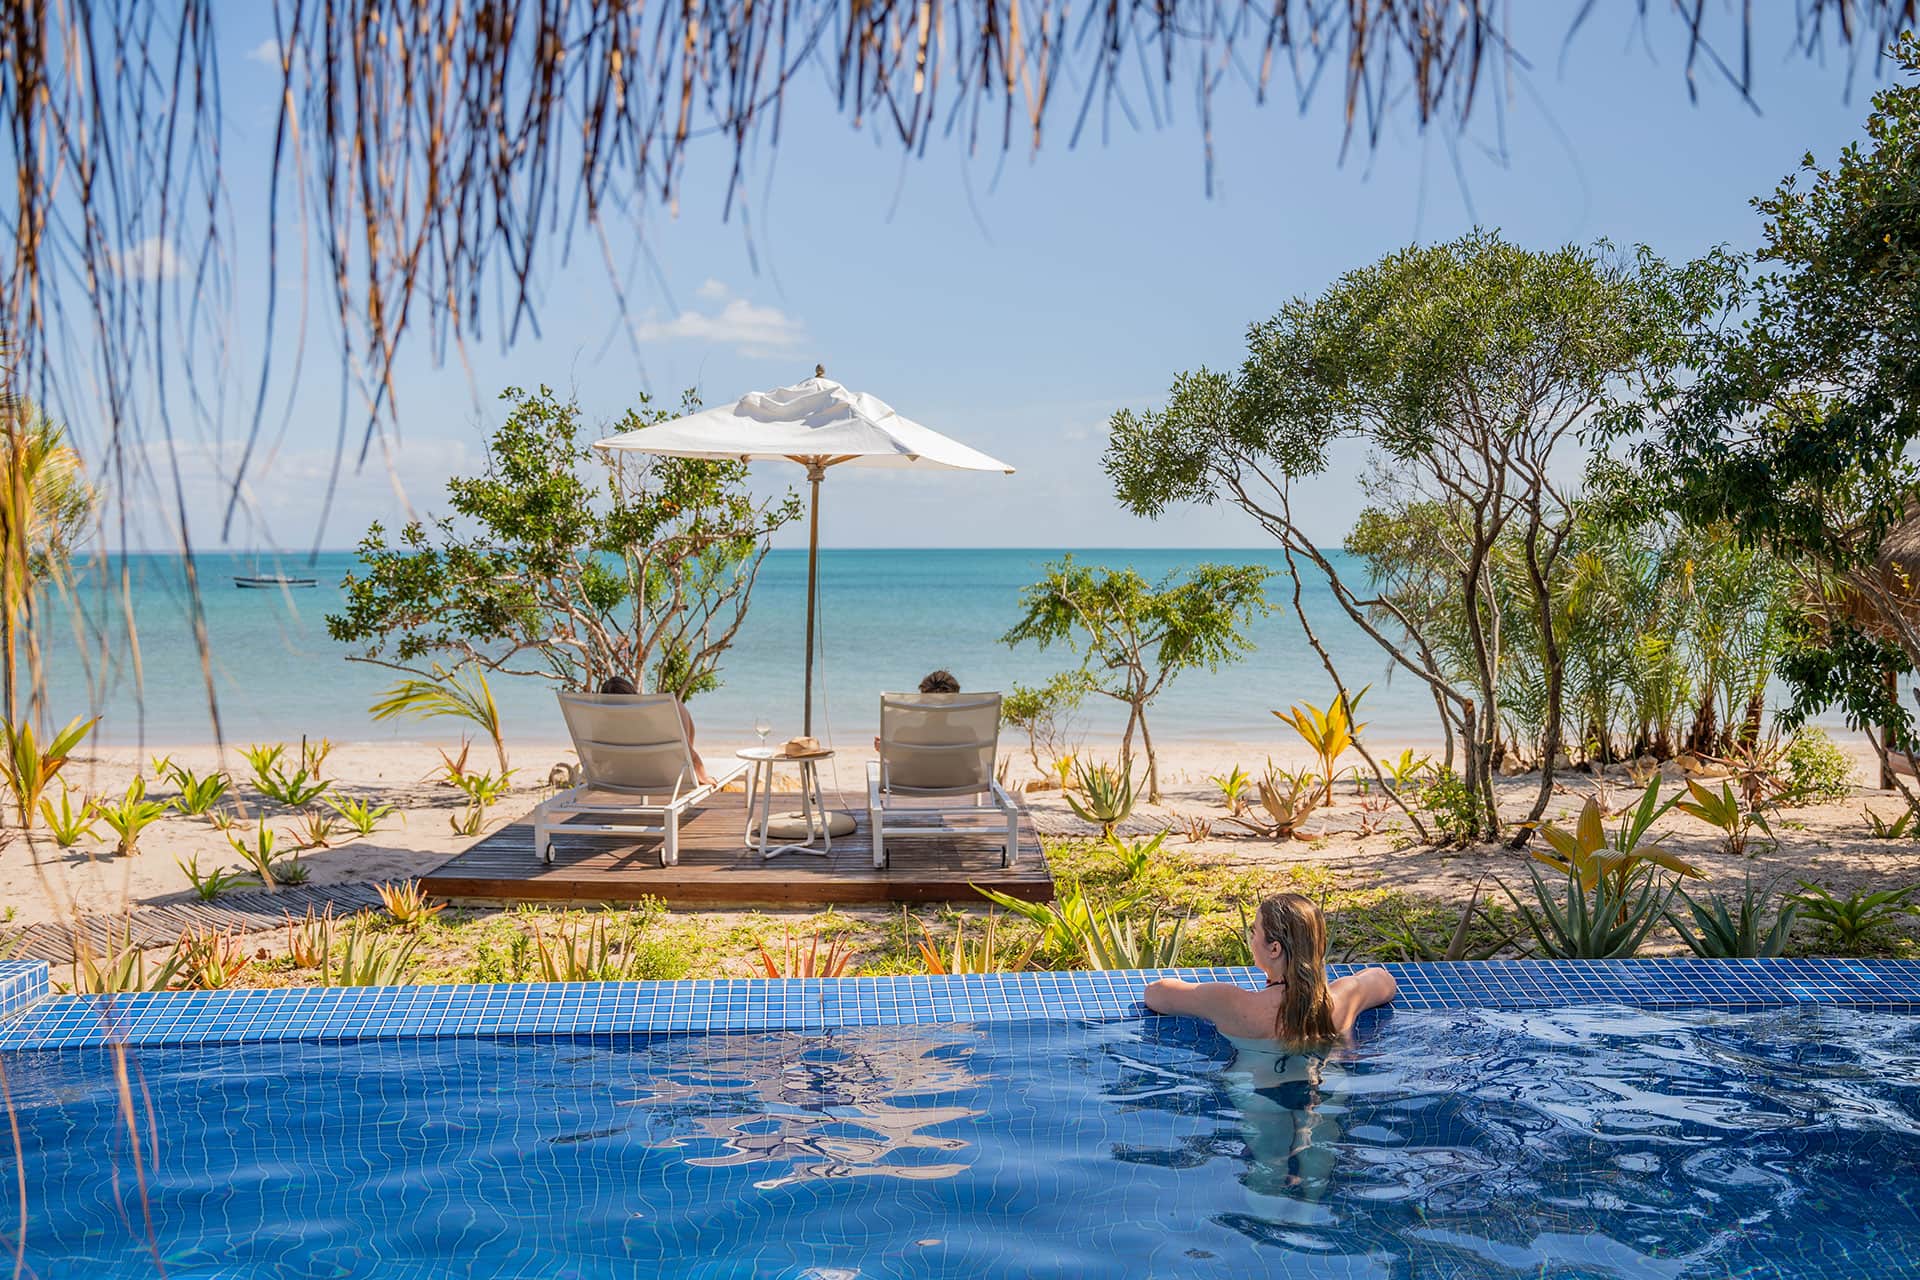 The infinity pool right on the beach at Azura Benguerra Island in Mozambique